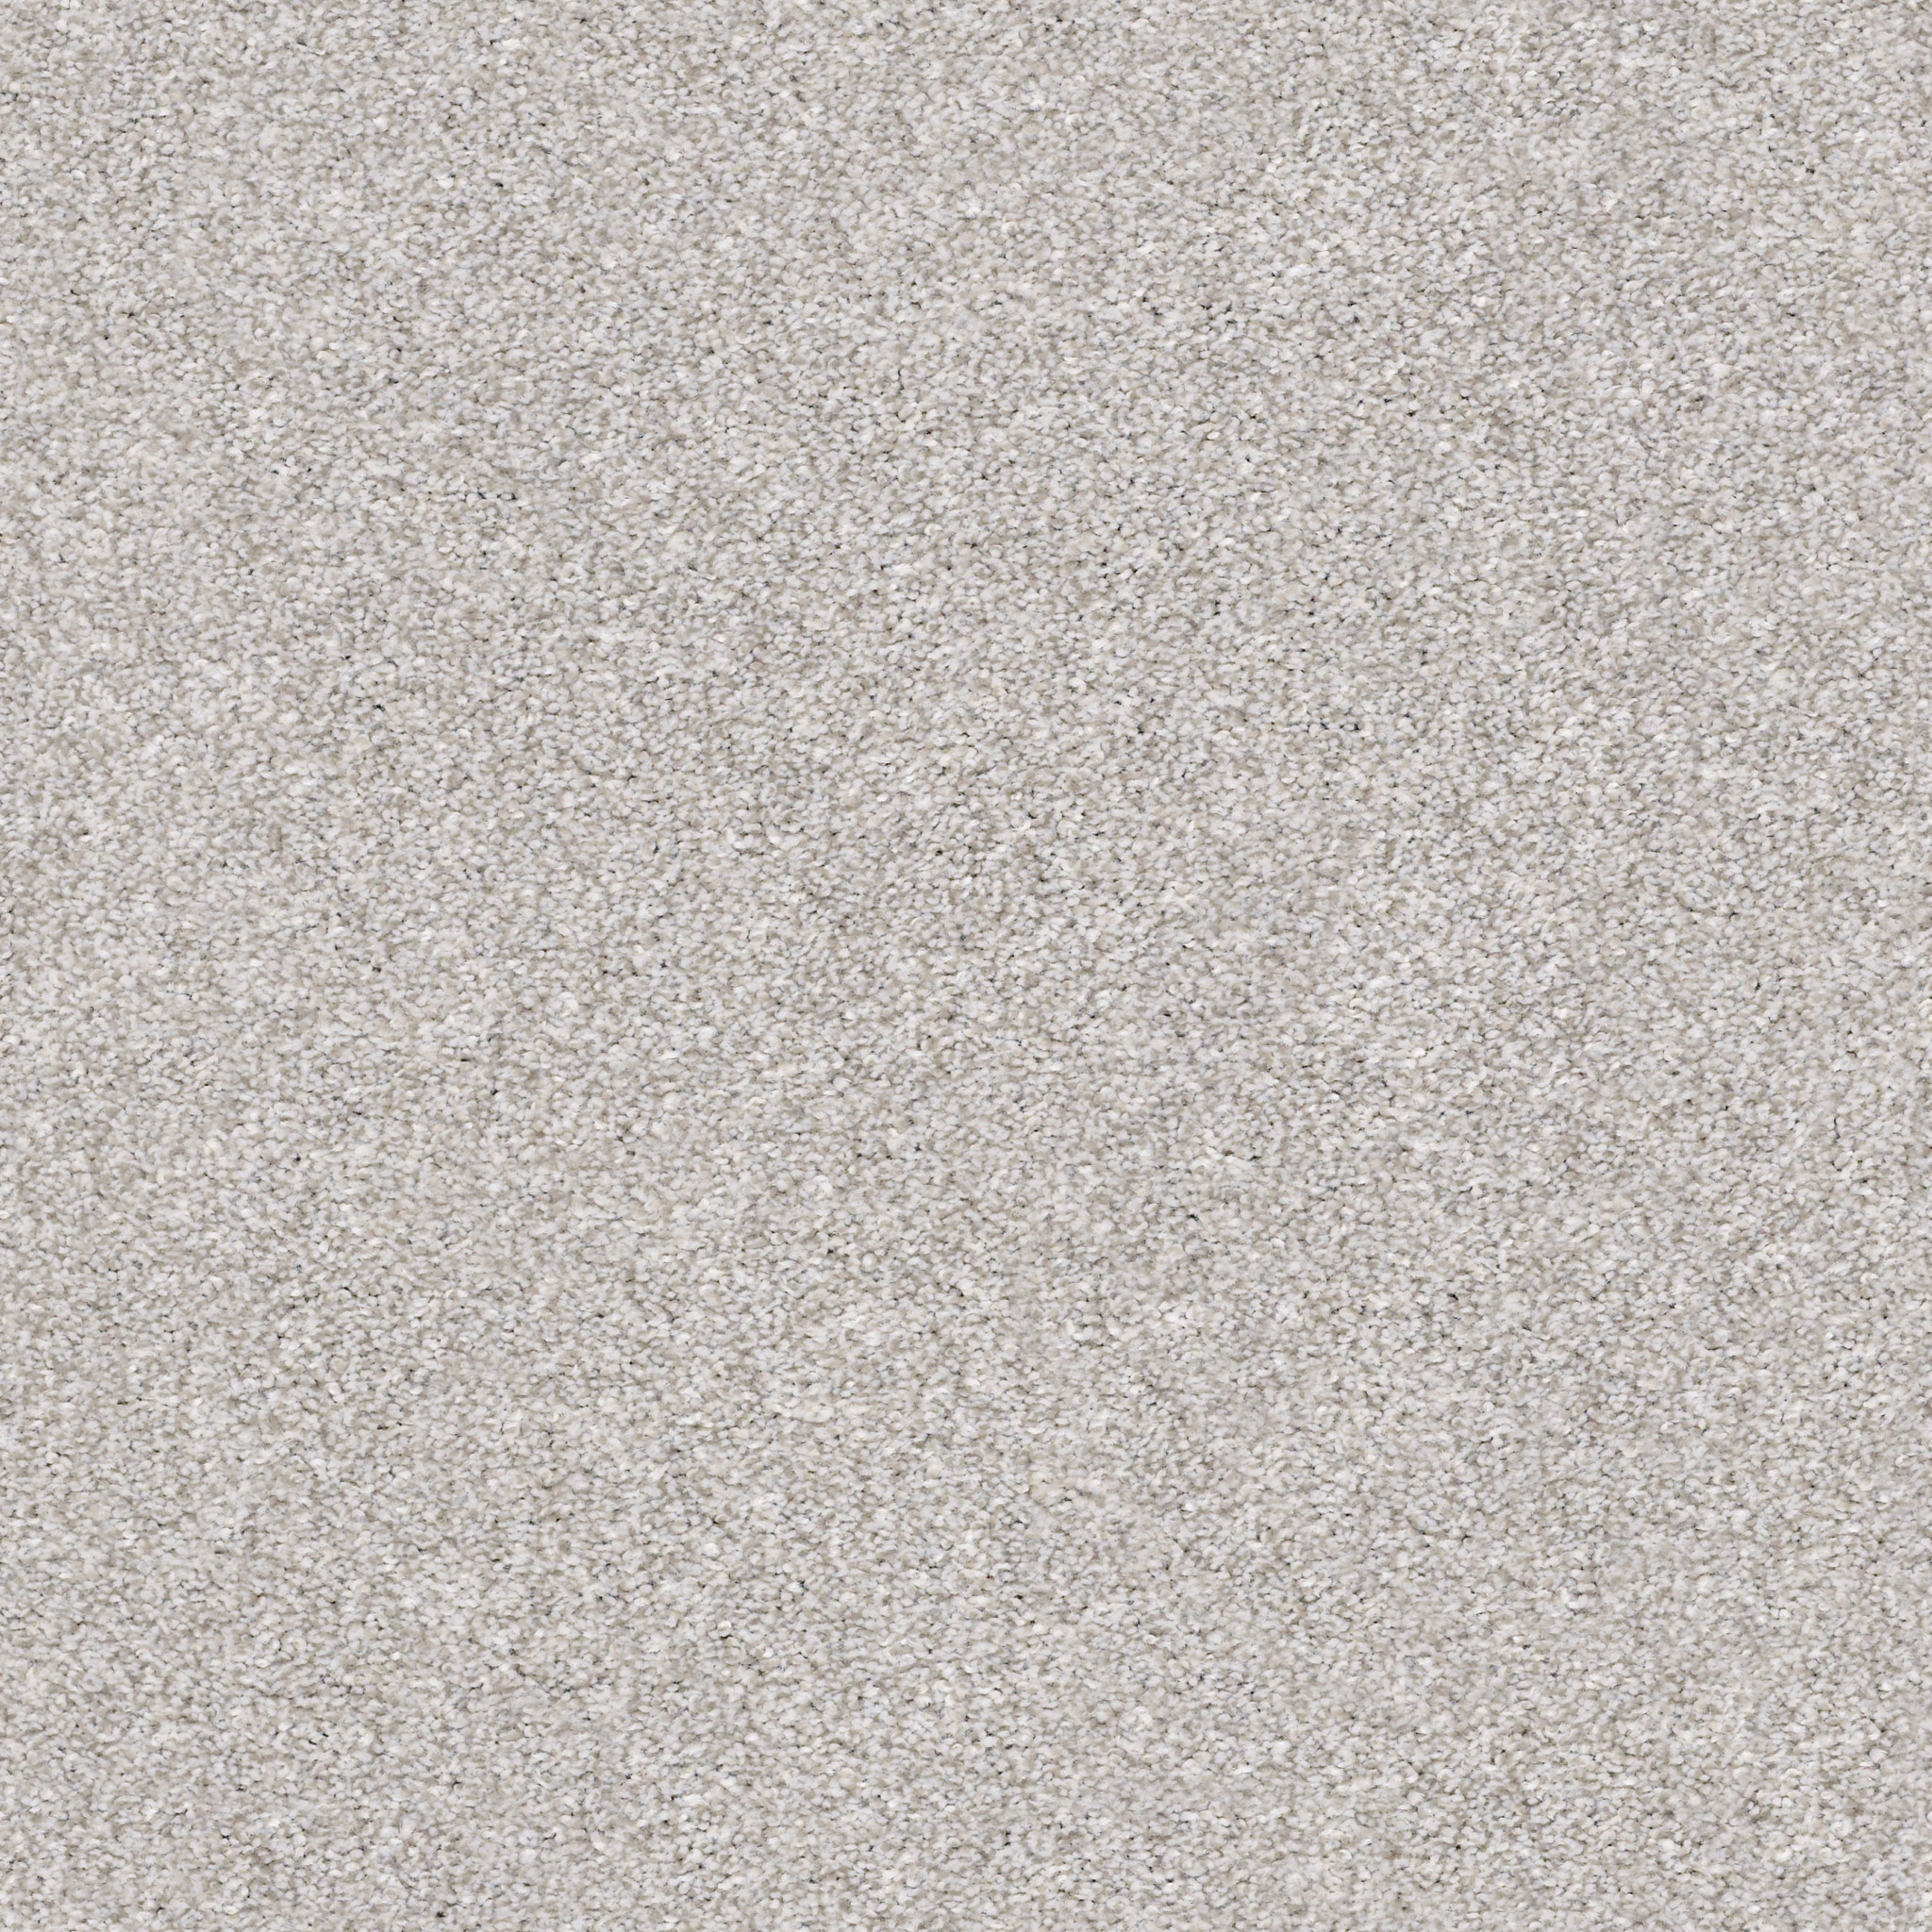 Search Carpet Results | Shaw Floors